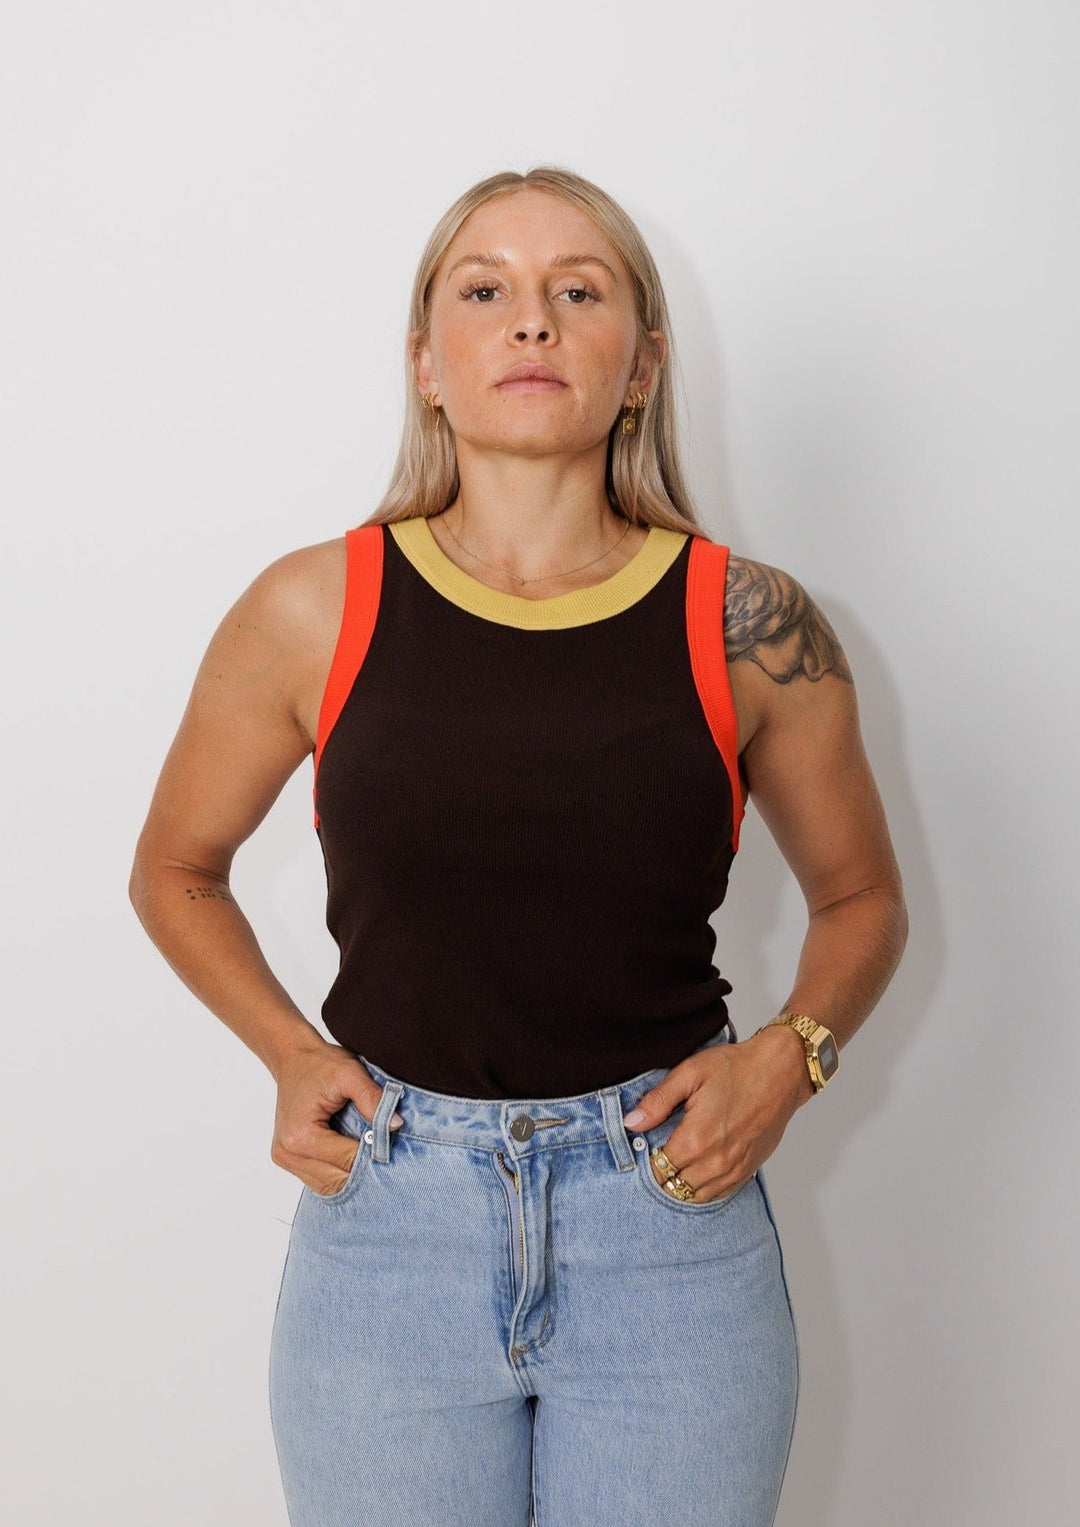 Clothing The Gaps. Blak Summer Rib Tank. Ribbed tank/ singlet has a retro washed Black base with retro washed red around the sleeves and a retro washed lighter yellow around the neckline. 